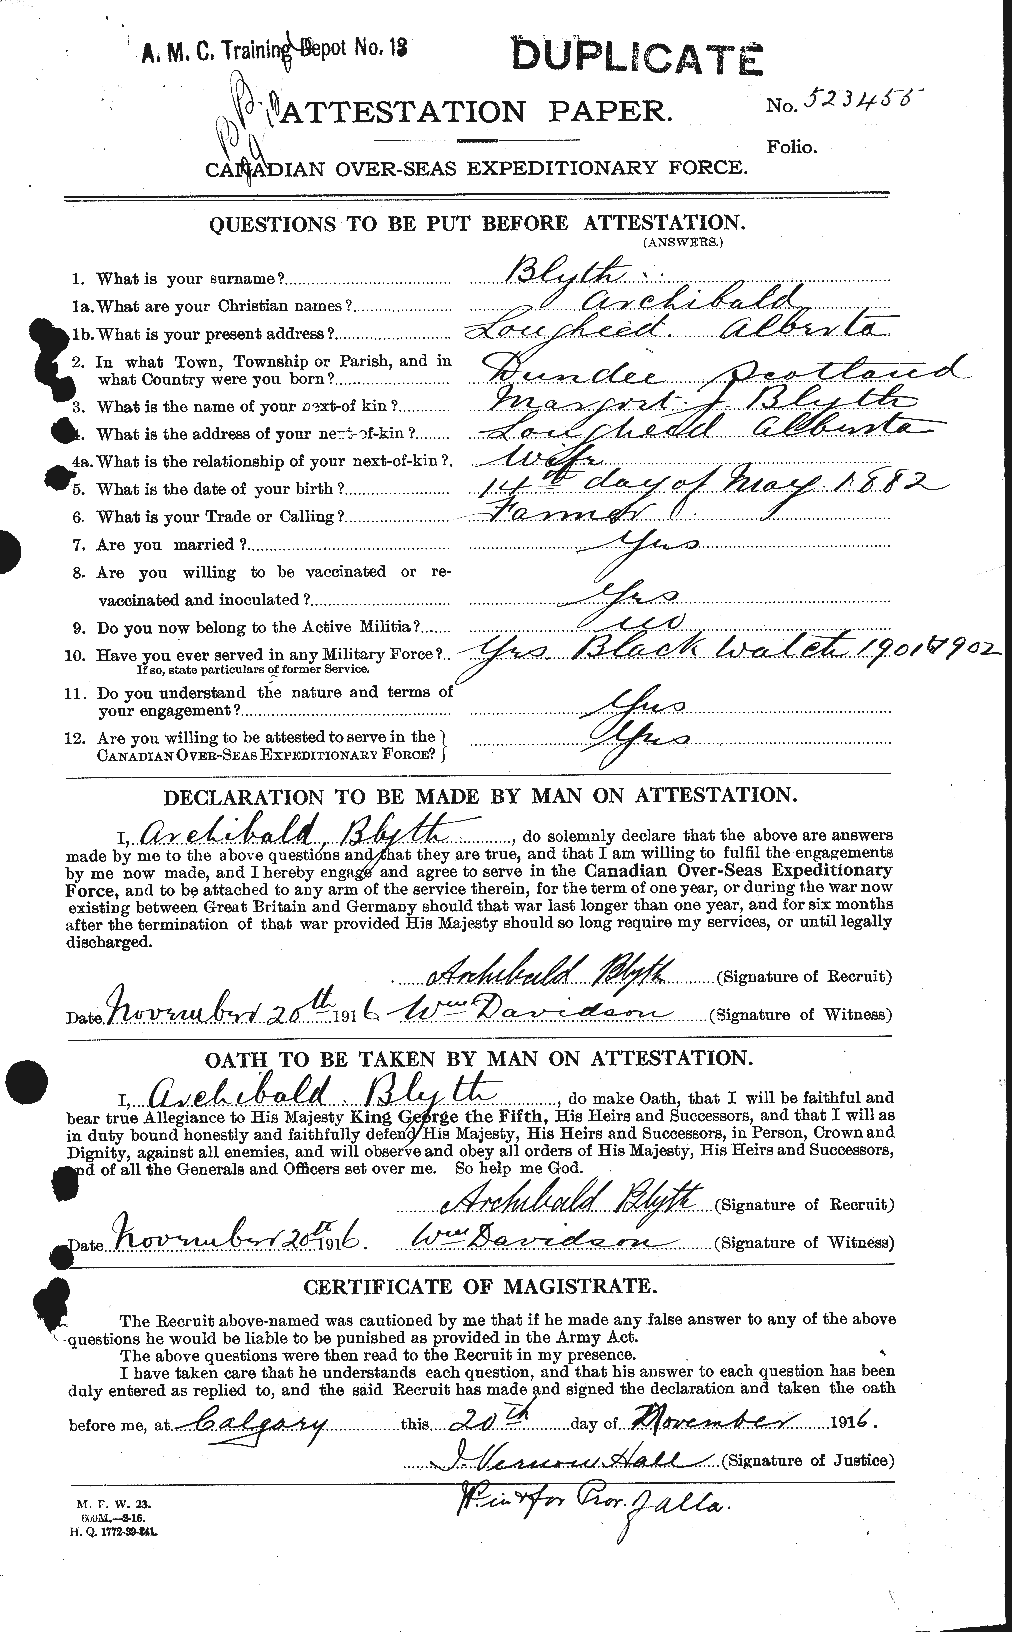 Personnel Records of the First World War - CEF 249073a